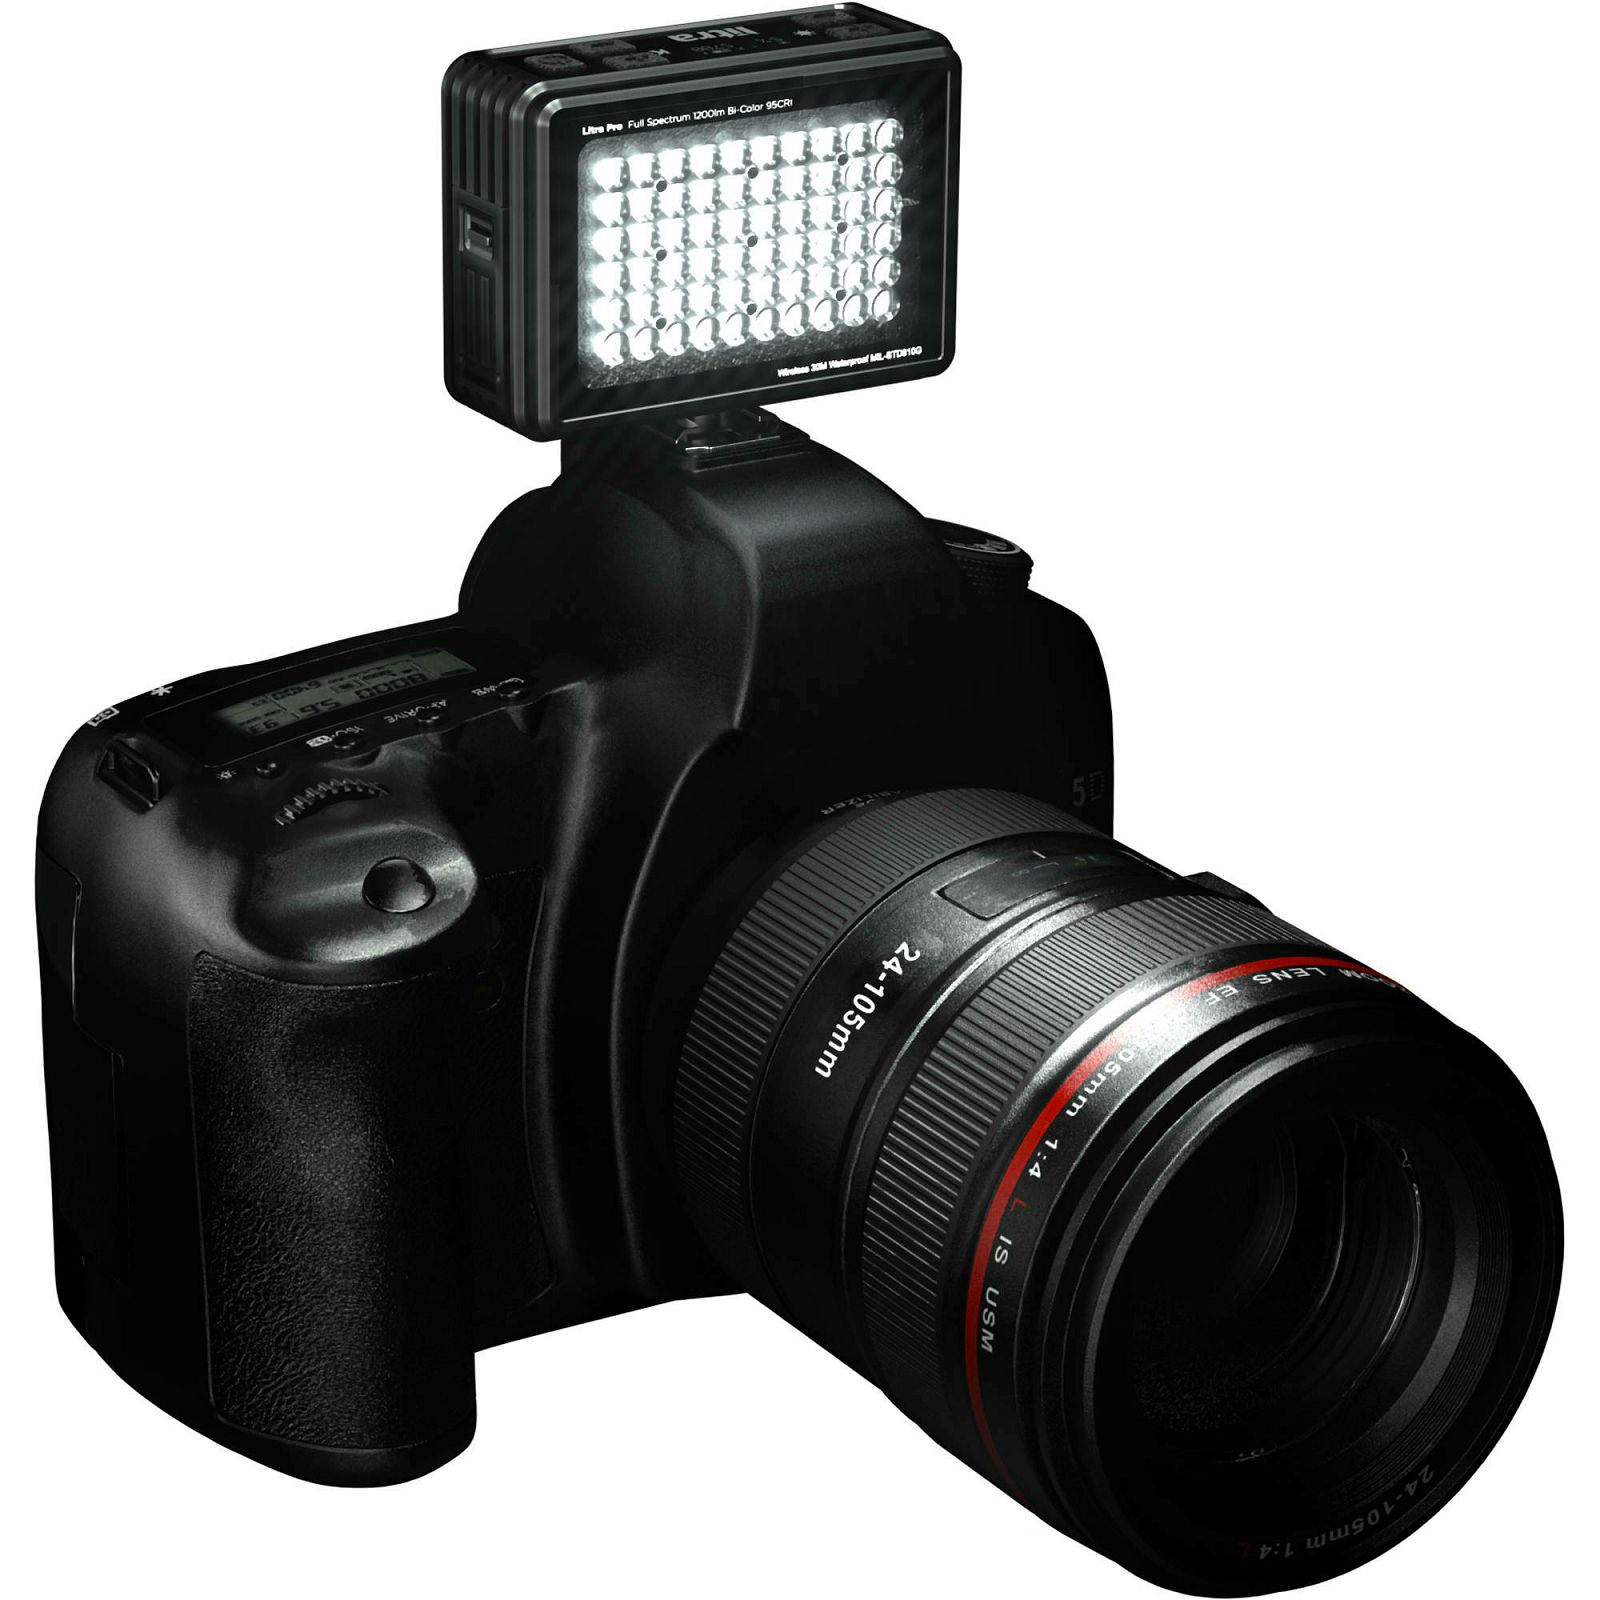 Litra Litra Pro Bi-Color On-Camera Light with Dome Diffuser, Shoe Mount, USB Cable (LP1200)